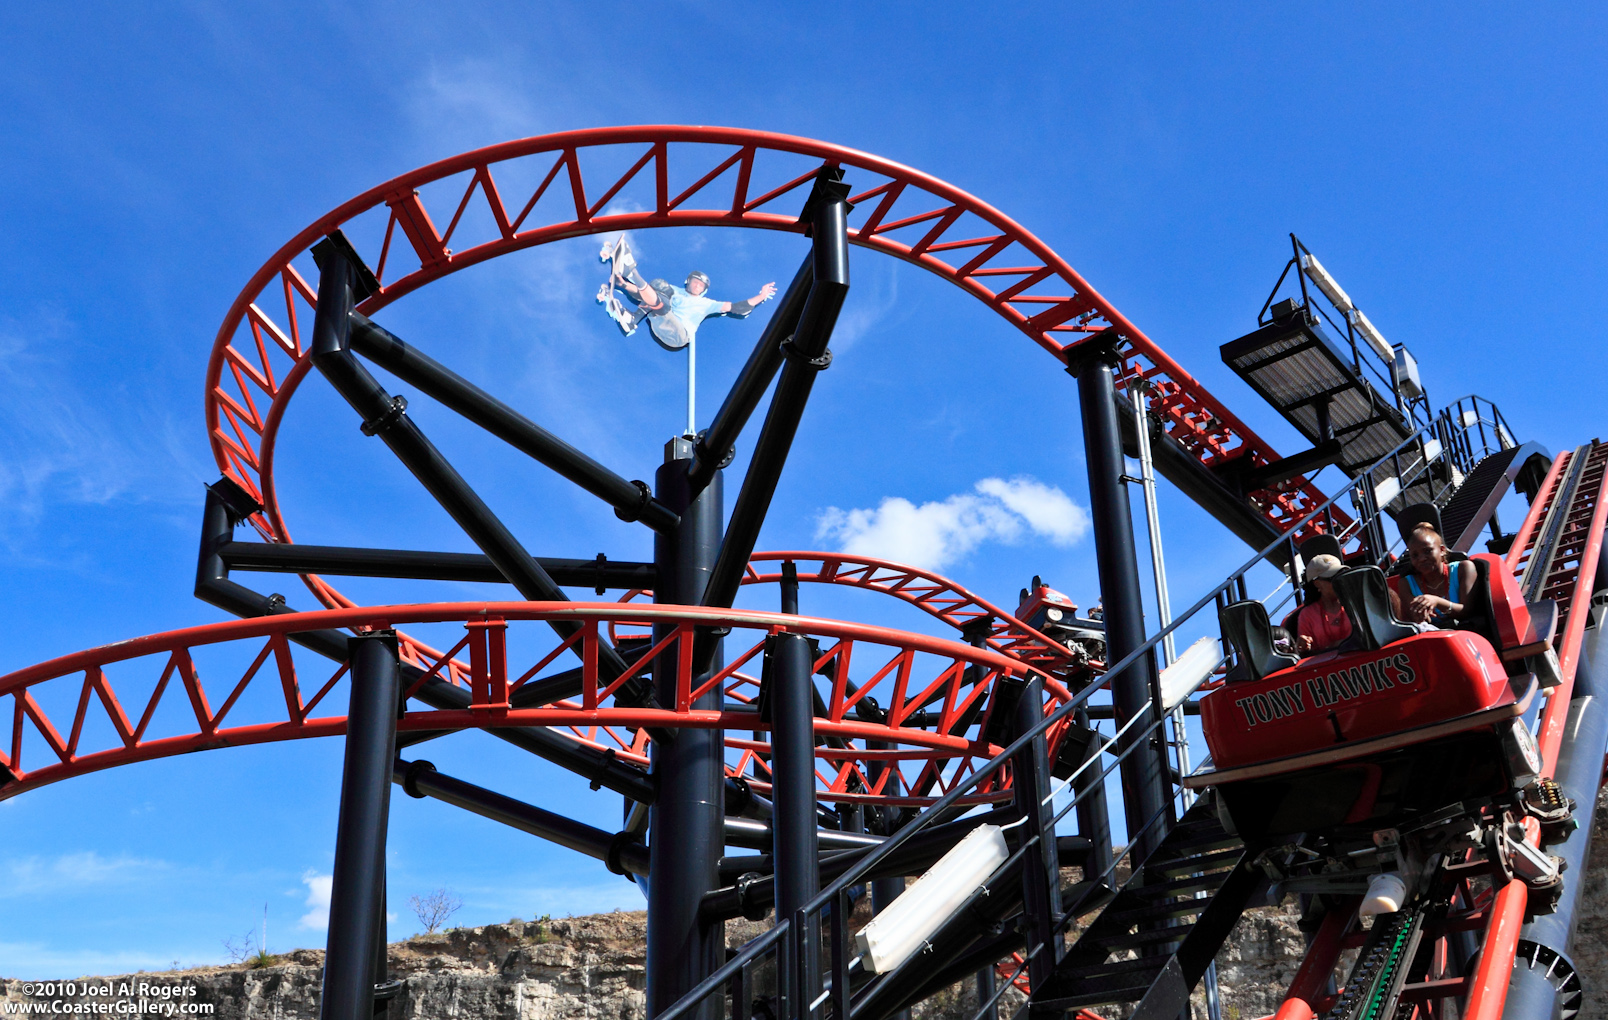 The Tony Hawk ppining roller coaster by Gerstlauer